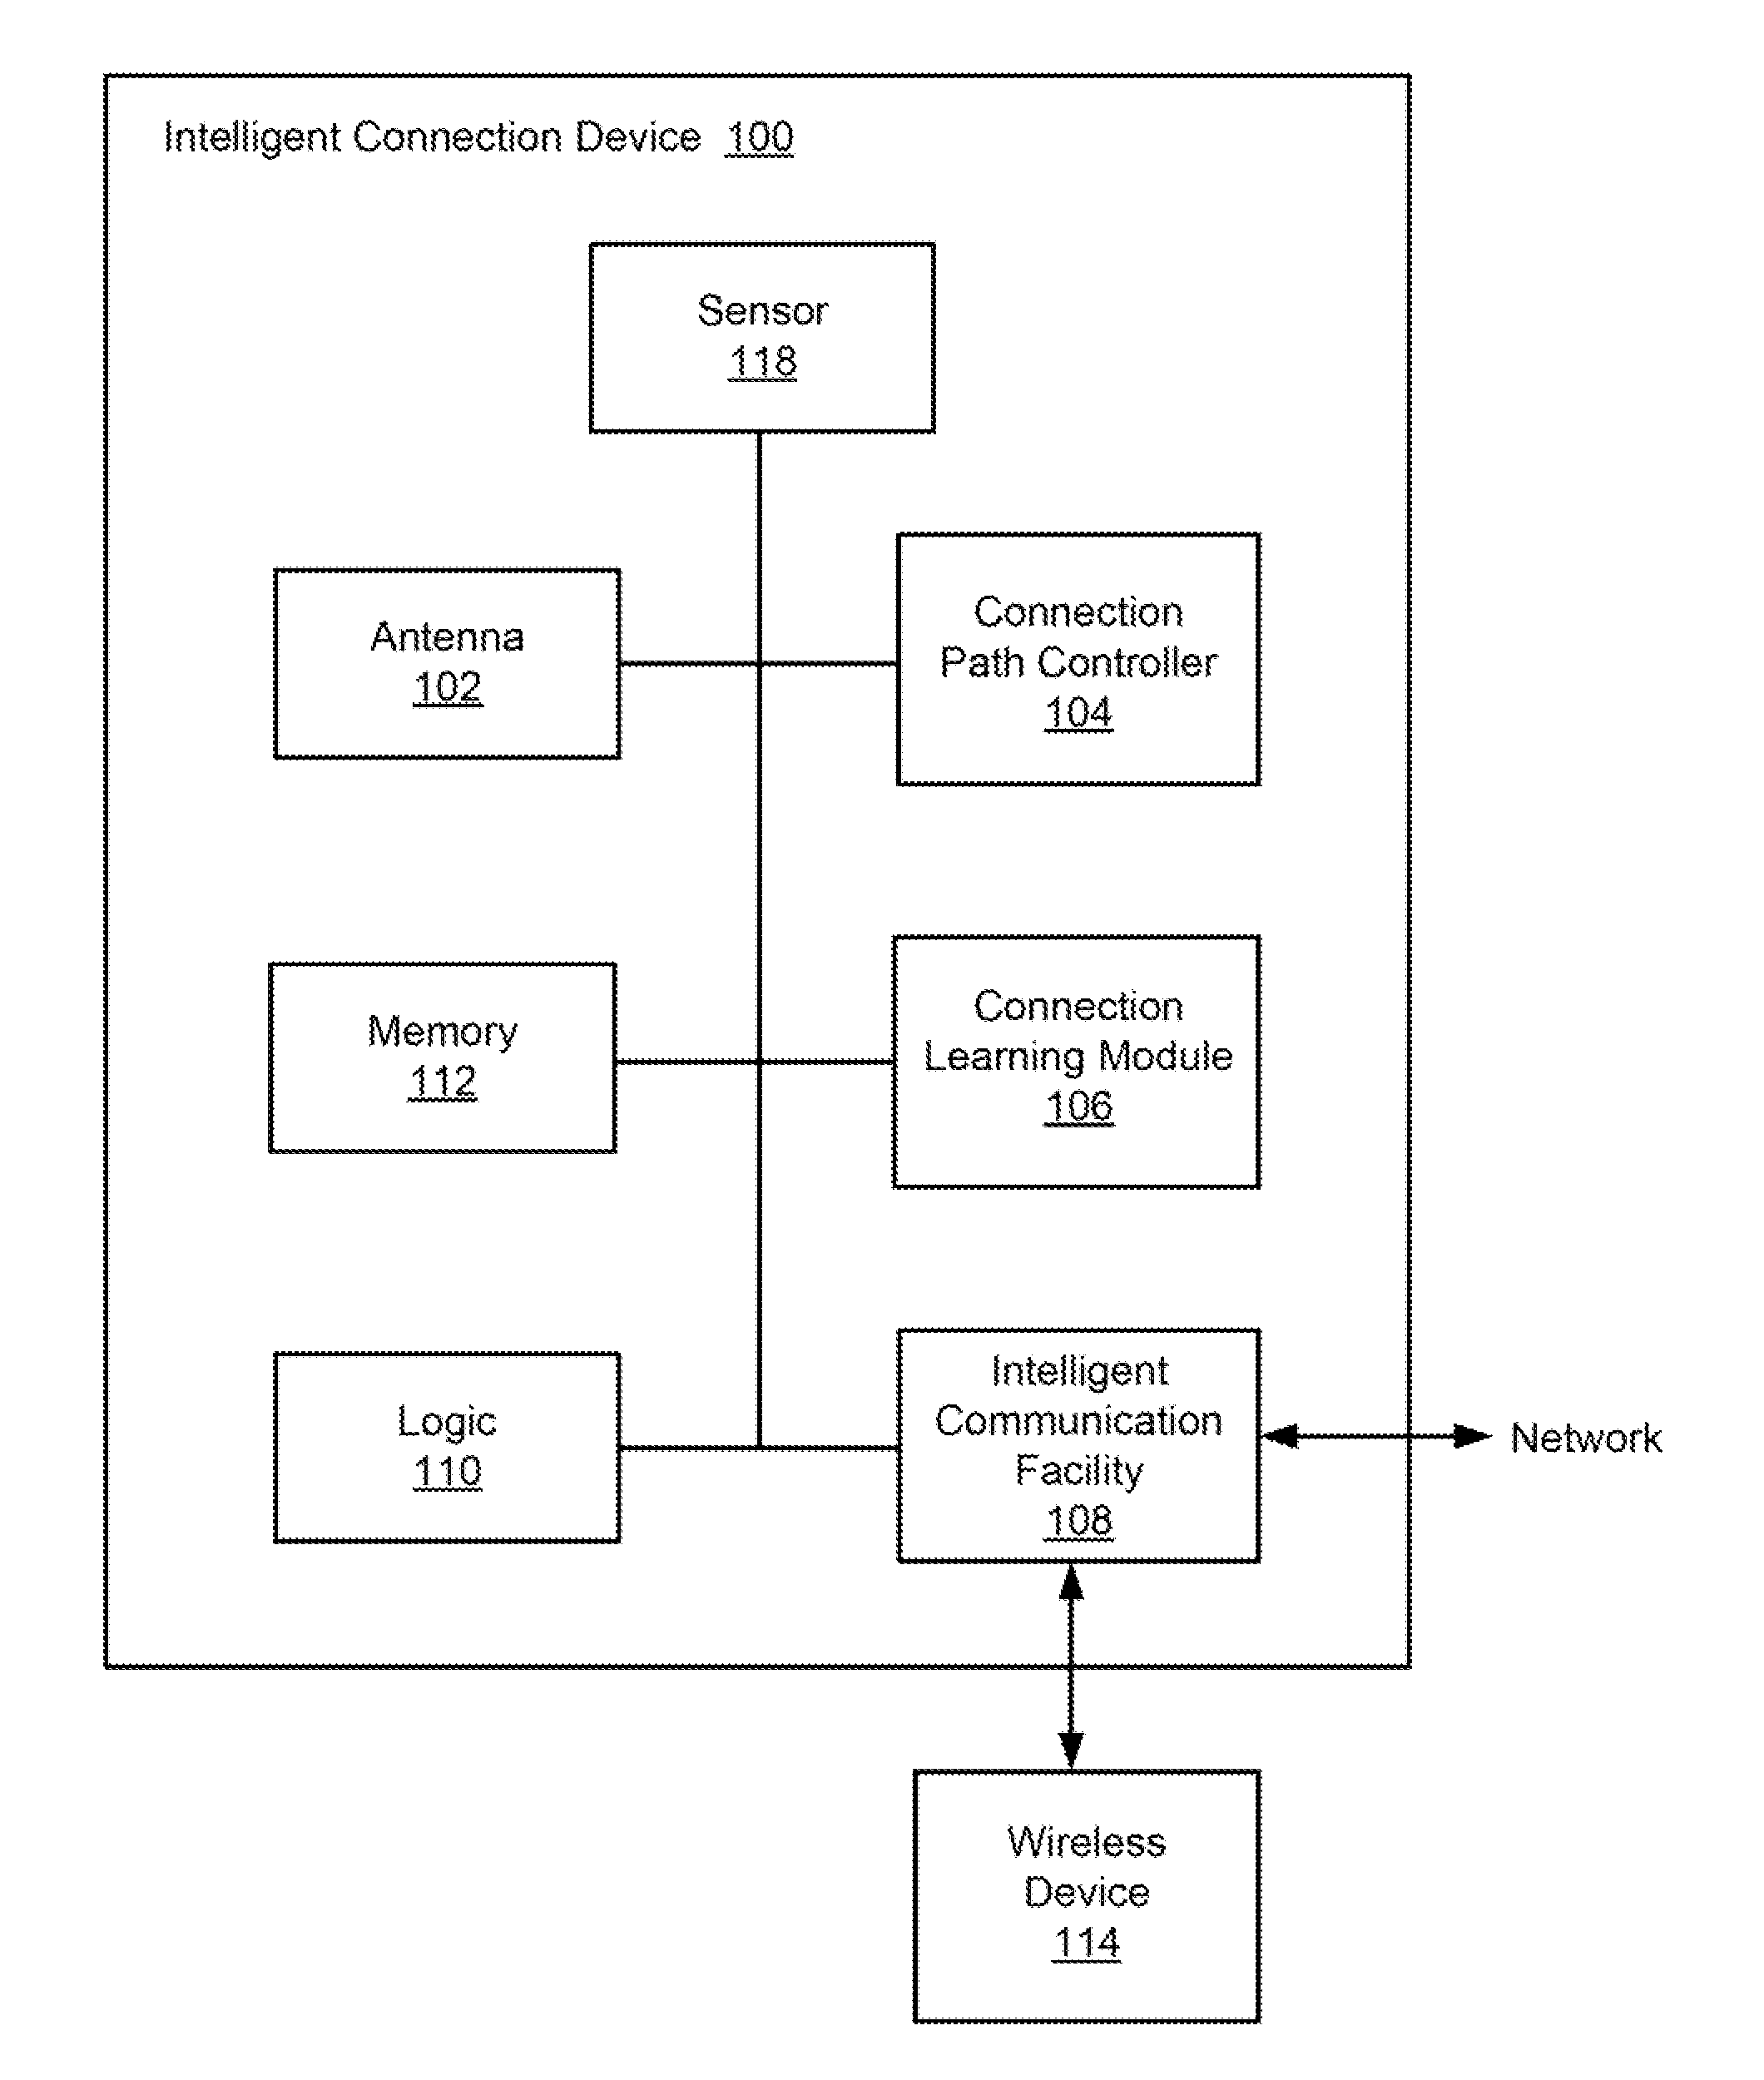 Intelligent connection management in wireless devices